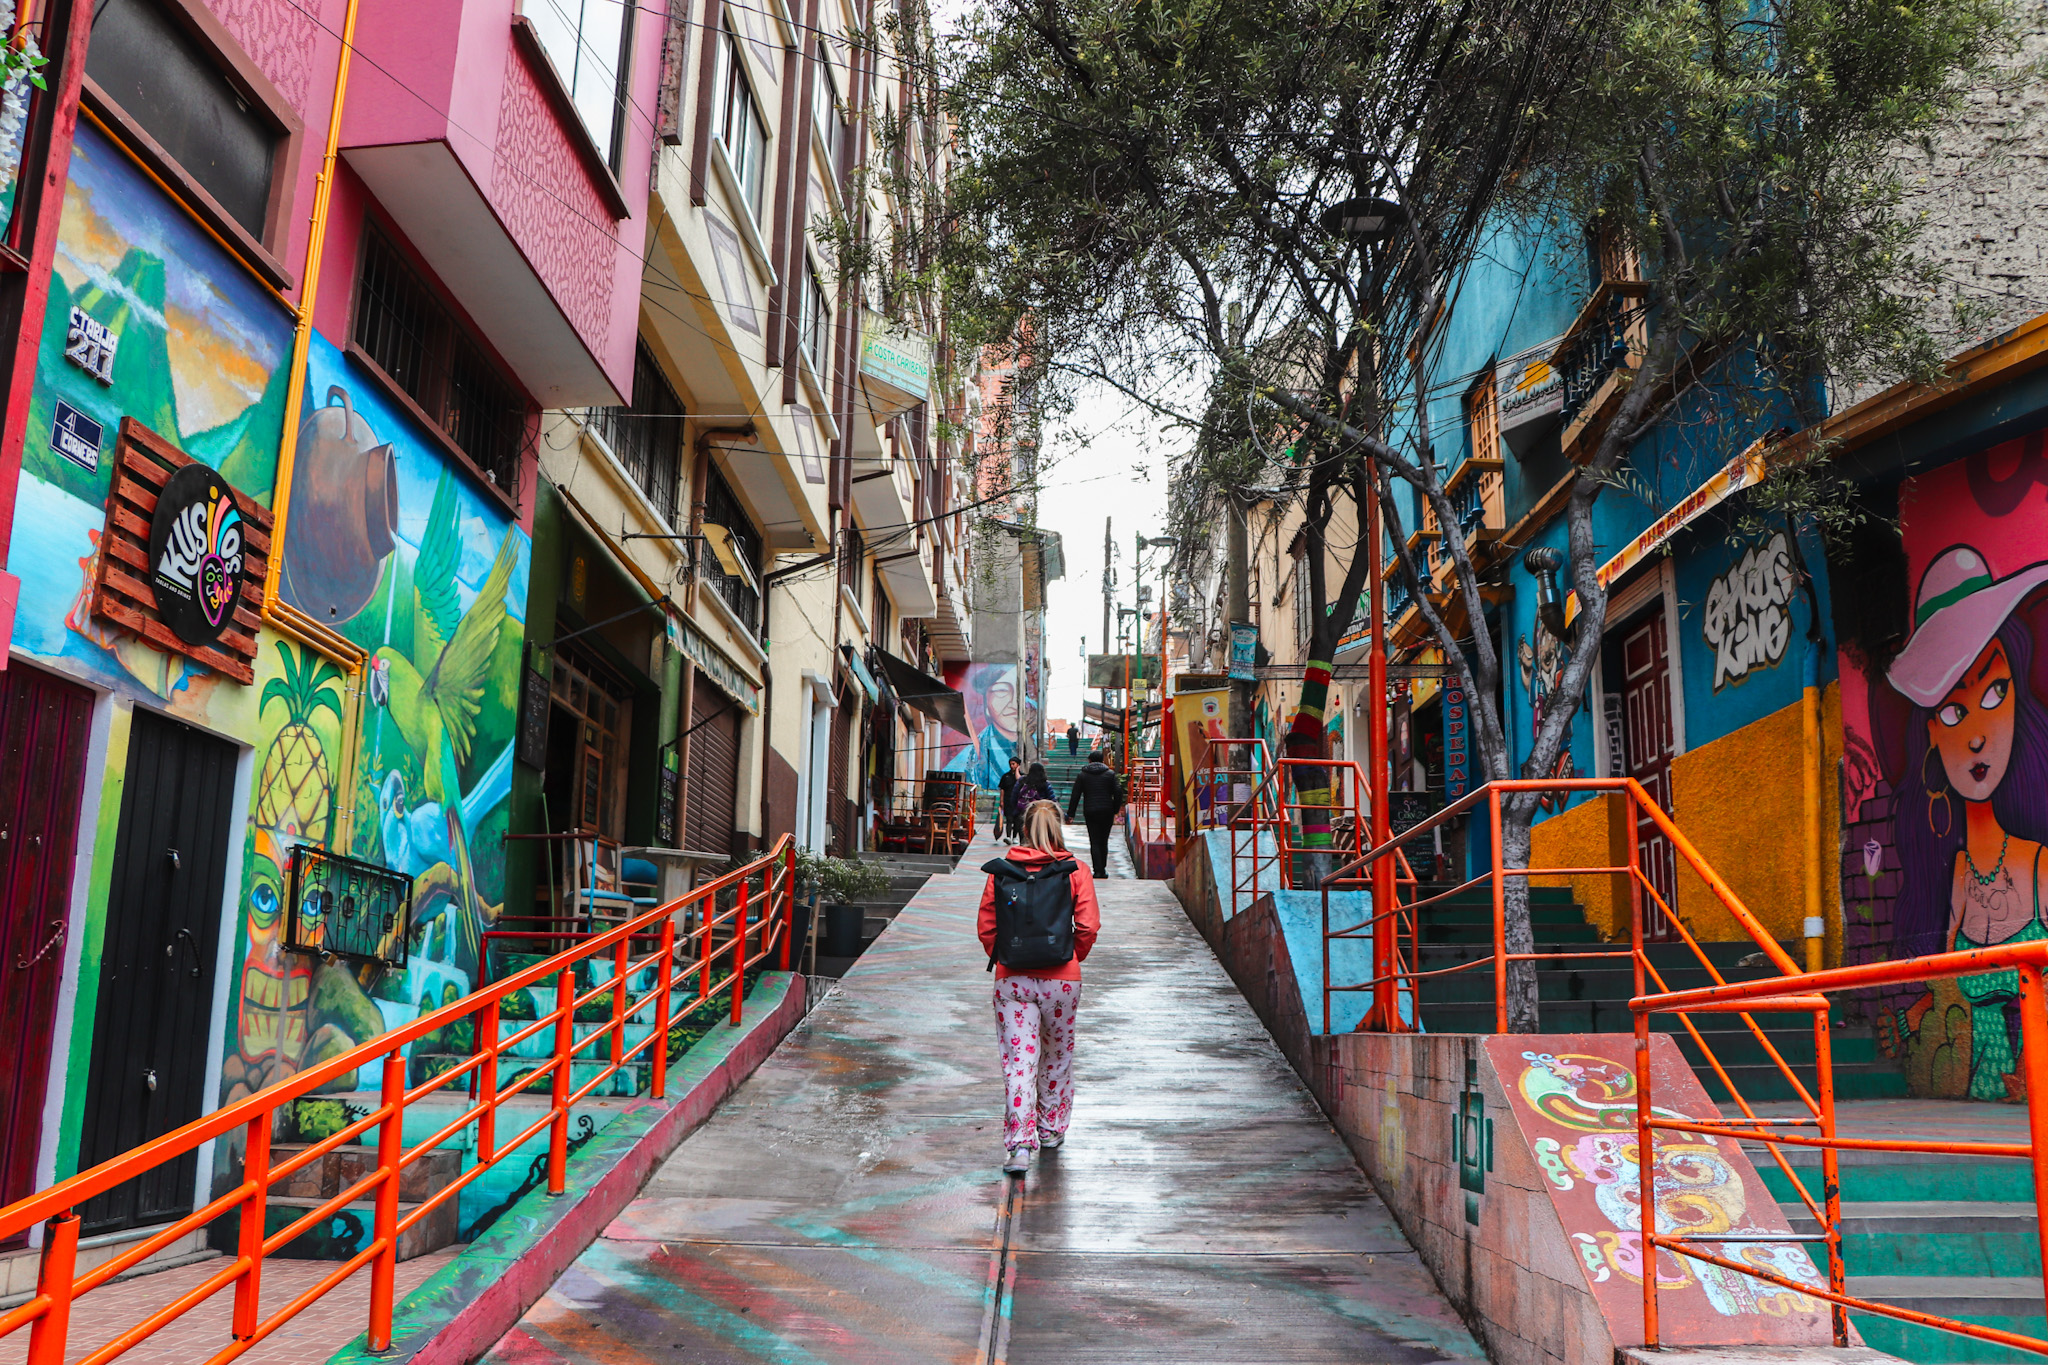 Things to do in La Paz, Bolivia: Explore the city on foot